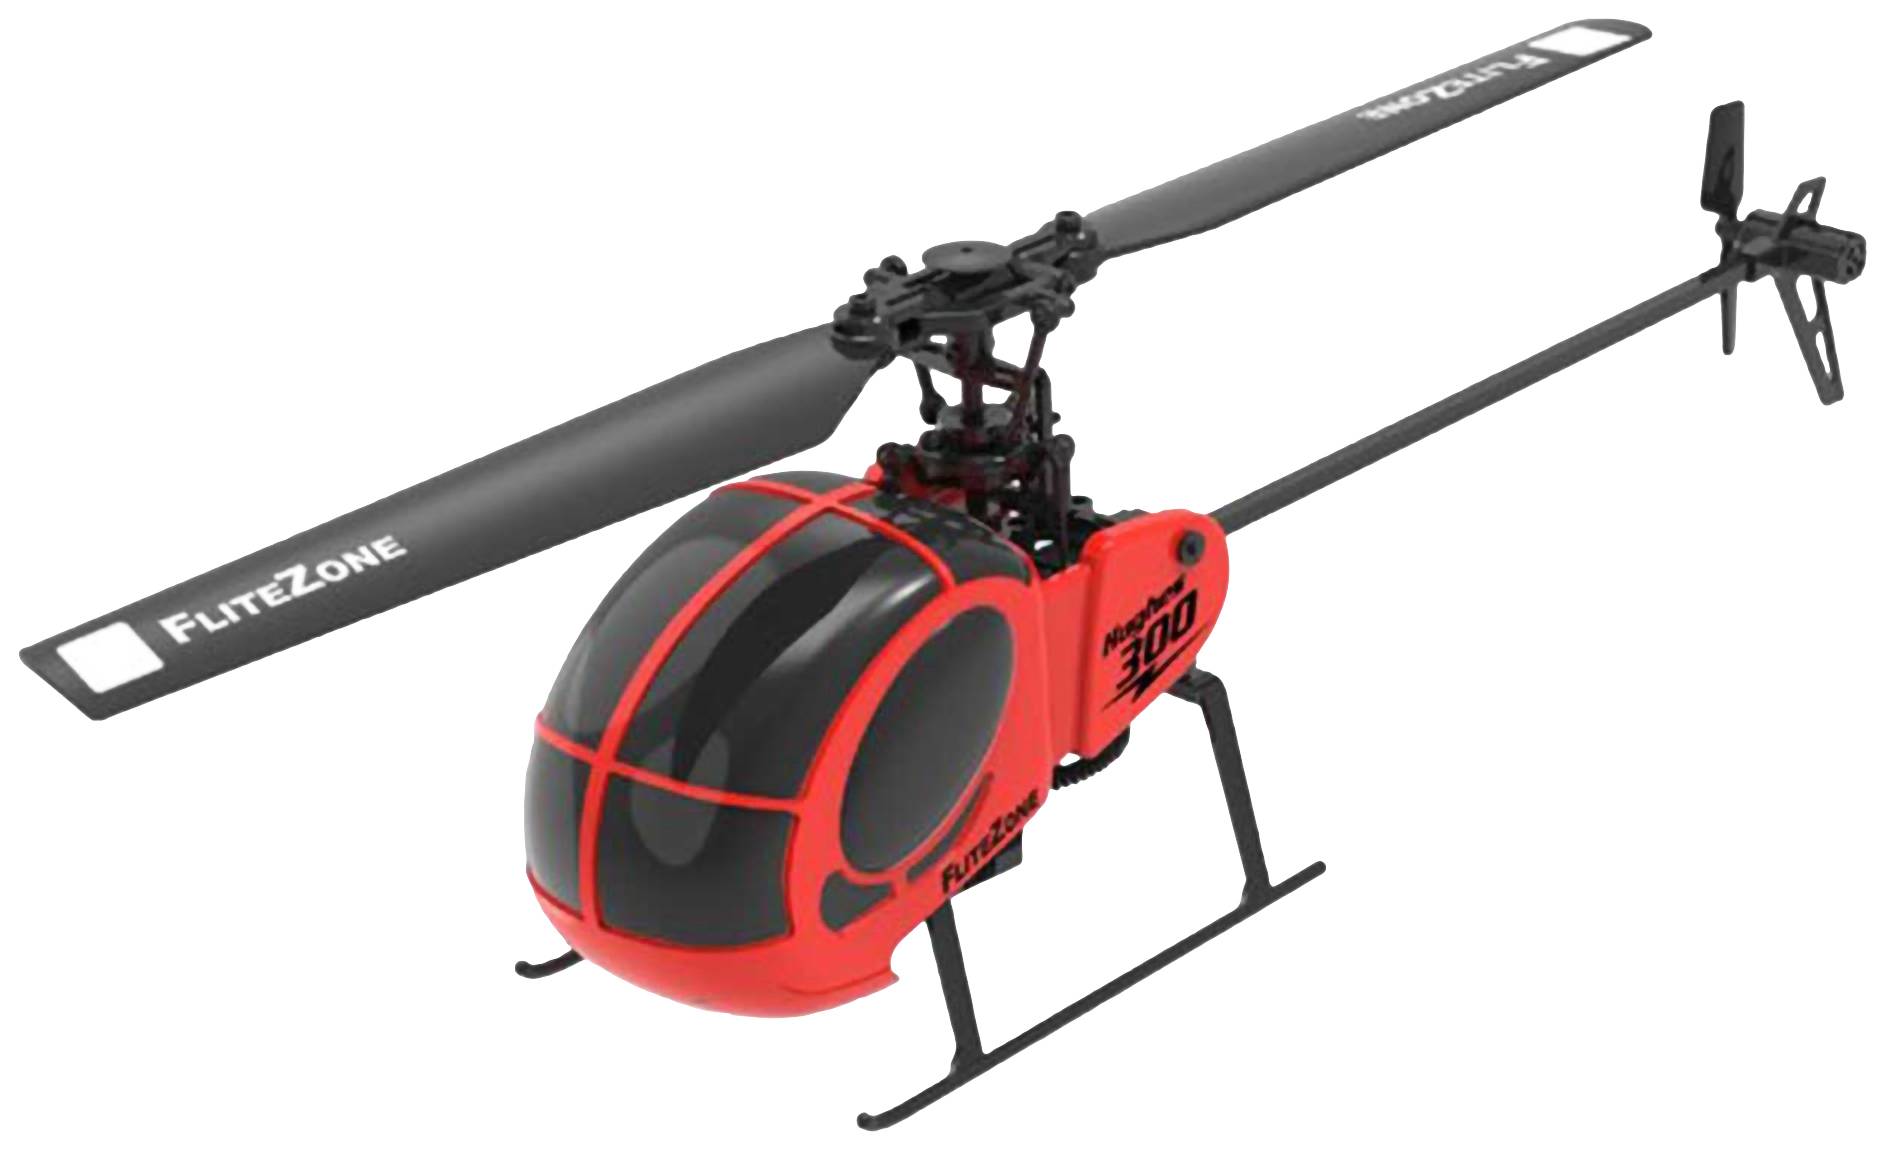 Pichler Hughes 300 helikopter ? Conrad Electronic